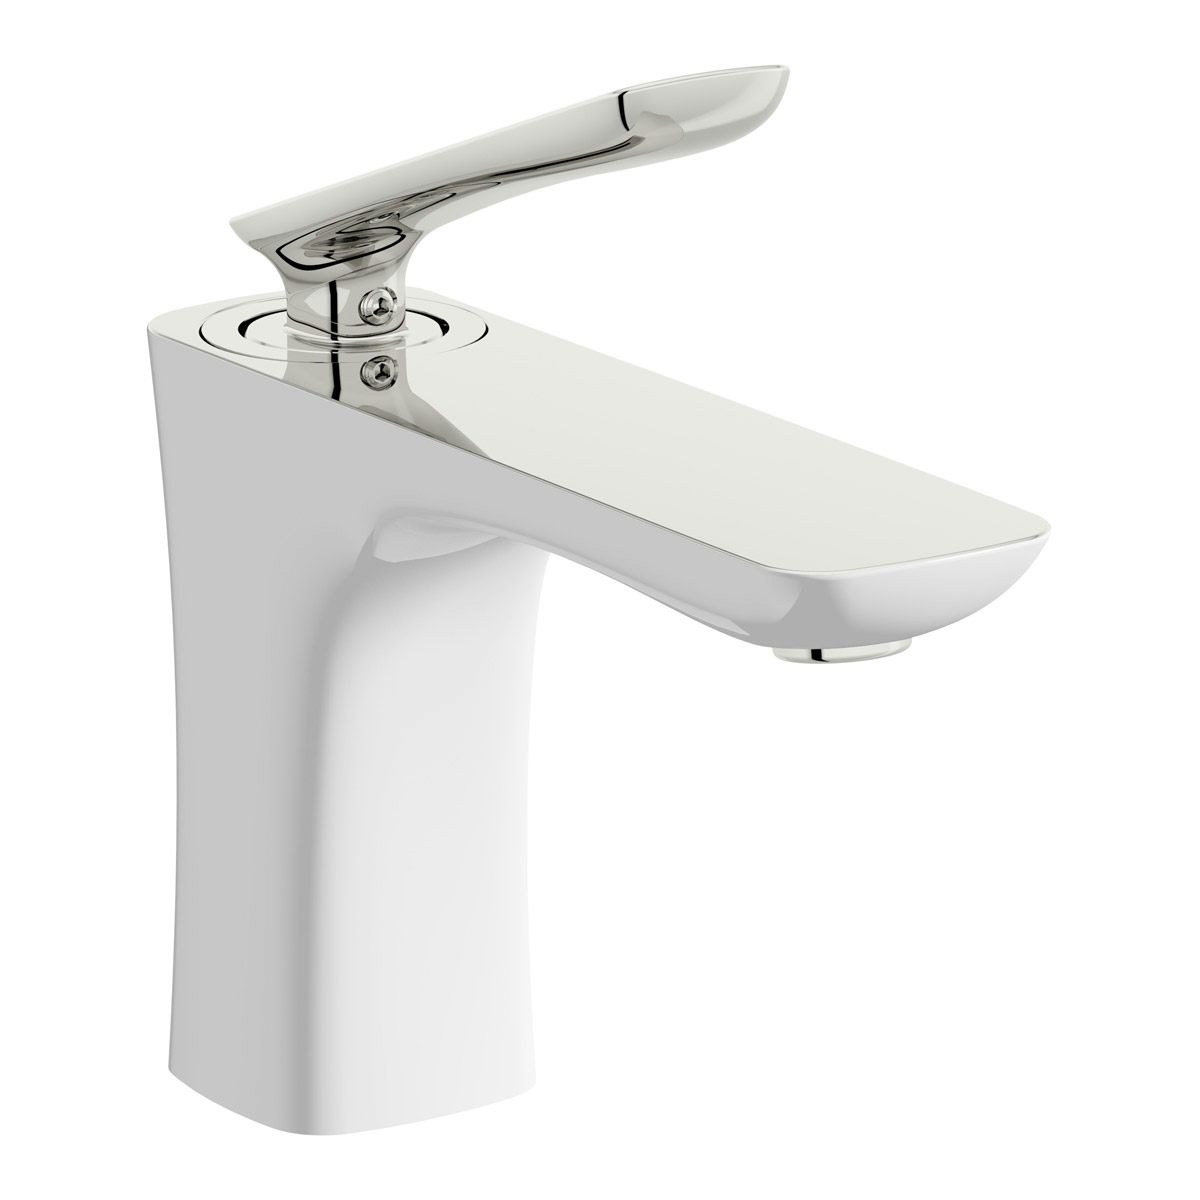 Mode Aalto white basin mixer tap with unslotted waste